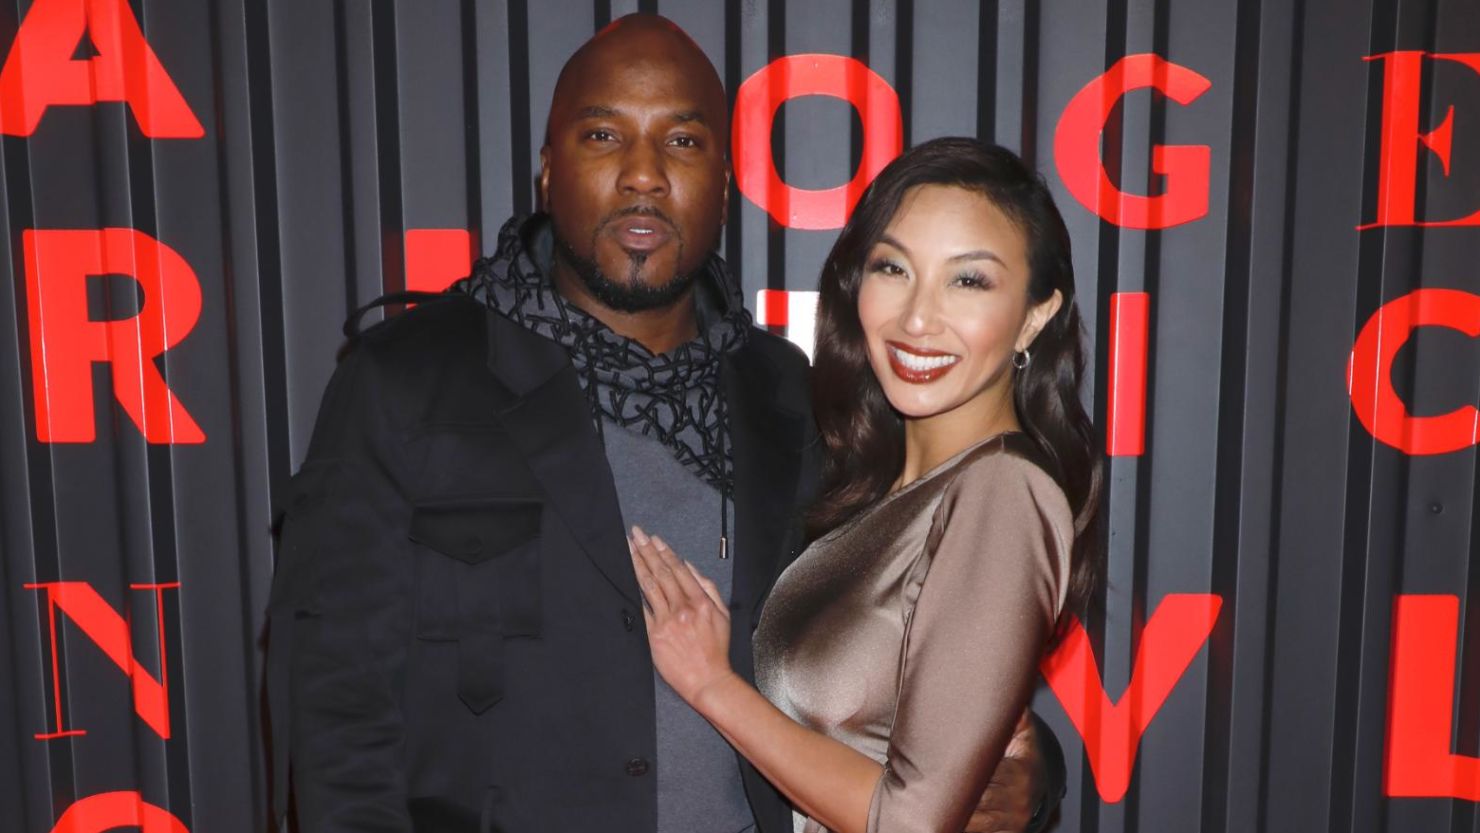 Jeezy and Jeannie Mai Jenkins at the Bvlgari x B.Zero1 Rock Collection debut party at New York Fashion Week on February 6, 2020